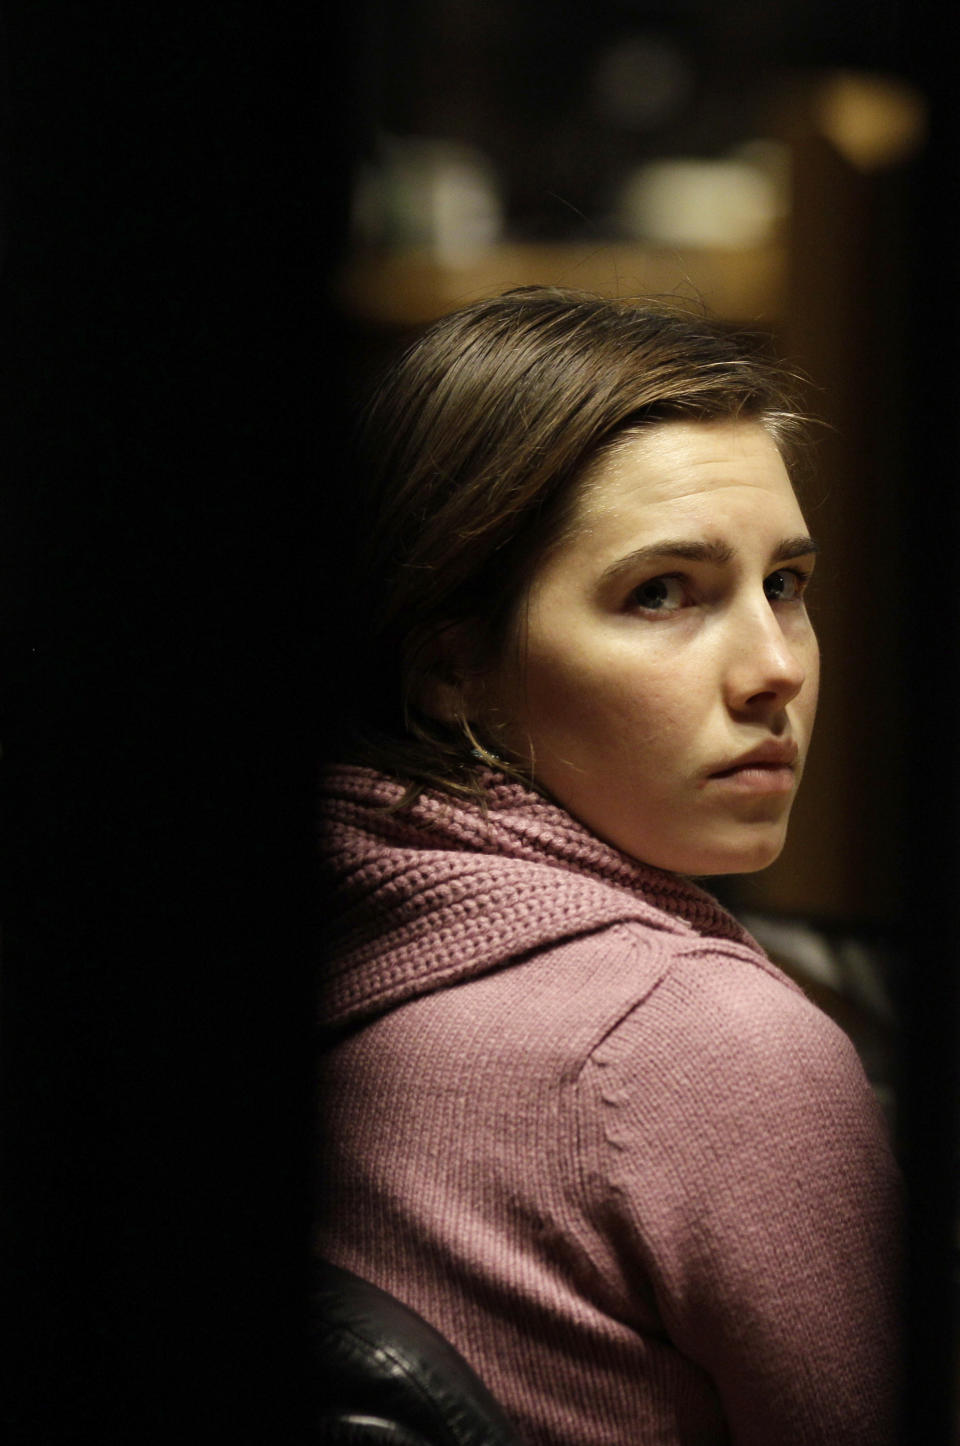 File- This Dec. 18, 2010 file photo shows convicted U.S. student Amanda Knox attends a hearing in her appeals trial, at Perugia's courthouse, Italy. To many Americans, especially in her hometown of Seattle, Amanda Knox seems the victim, unfairly hounded by a capricious foreign legal system for the death of a 21-year-old British woman. But in Italy and elsewhere in Europe, others see her as someone who got away with murder, embroiled in a case that continues to make global headlines and reinforces a negative image of Americans behaving badly, even criminally, abroad without any punishment. As she remains free in the U.S., these perceptions will not only fuel the debate about who killed Meredith Kercher in 2007 and what role, if any, Knox played in her death, but also about whether U.S. authorities should, if asked, send her to Italy to face prison. (AP Photo/Alessandra Tarantino, File)